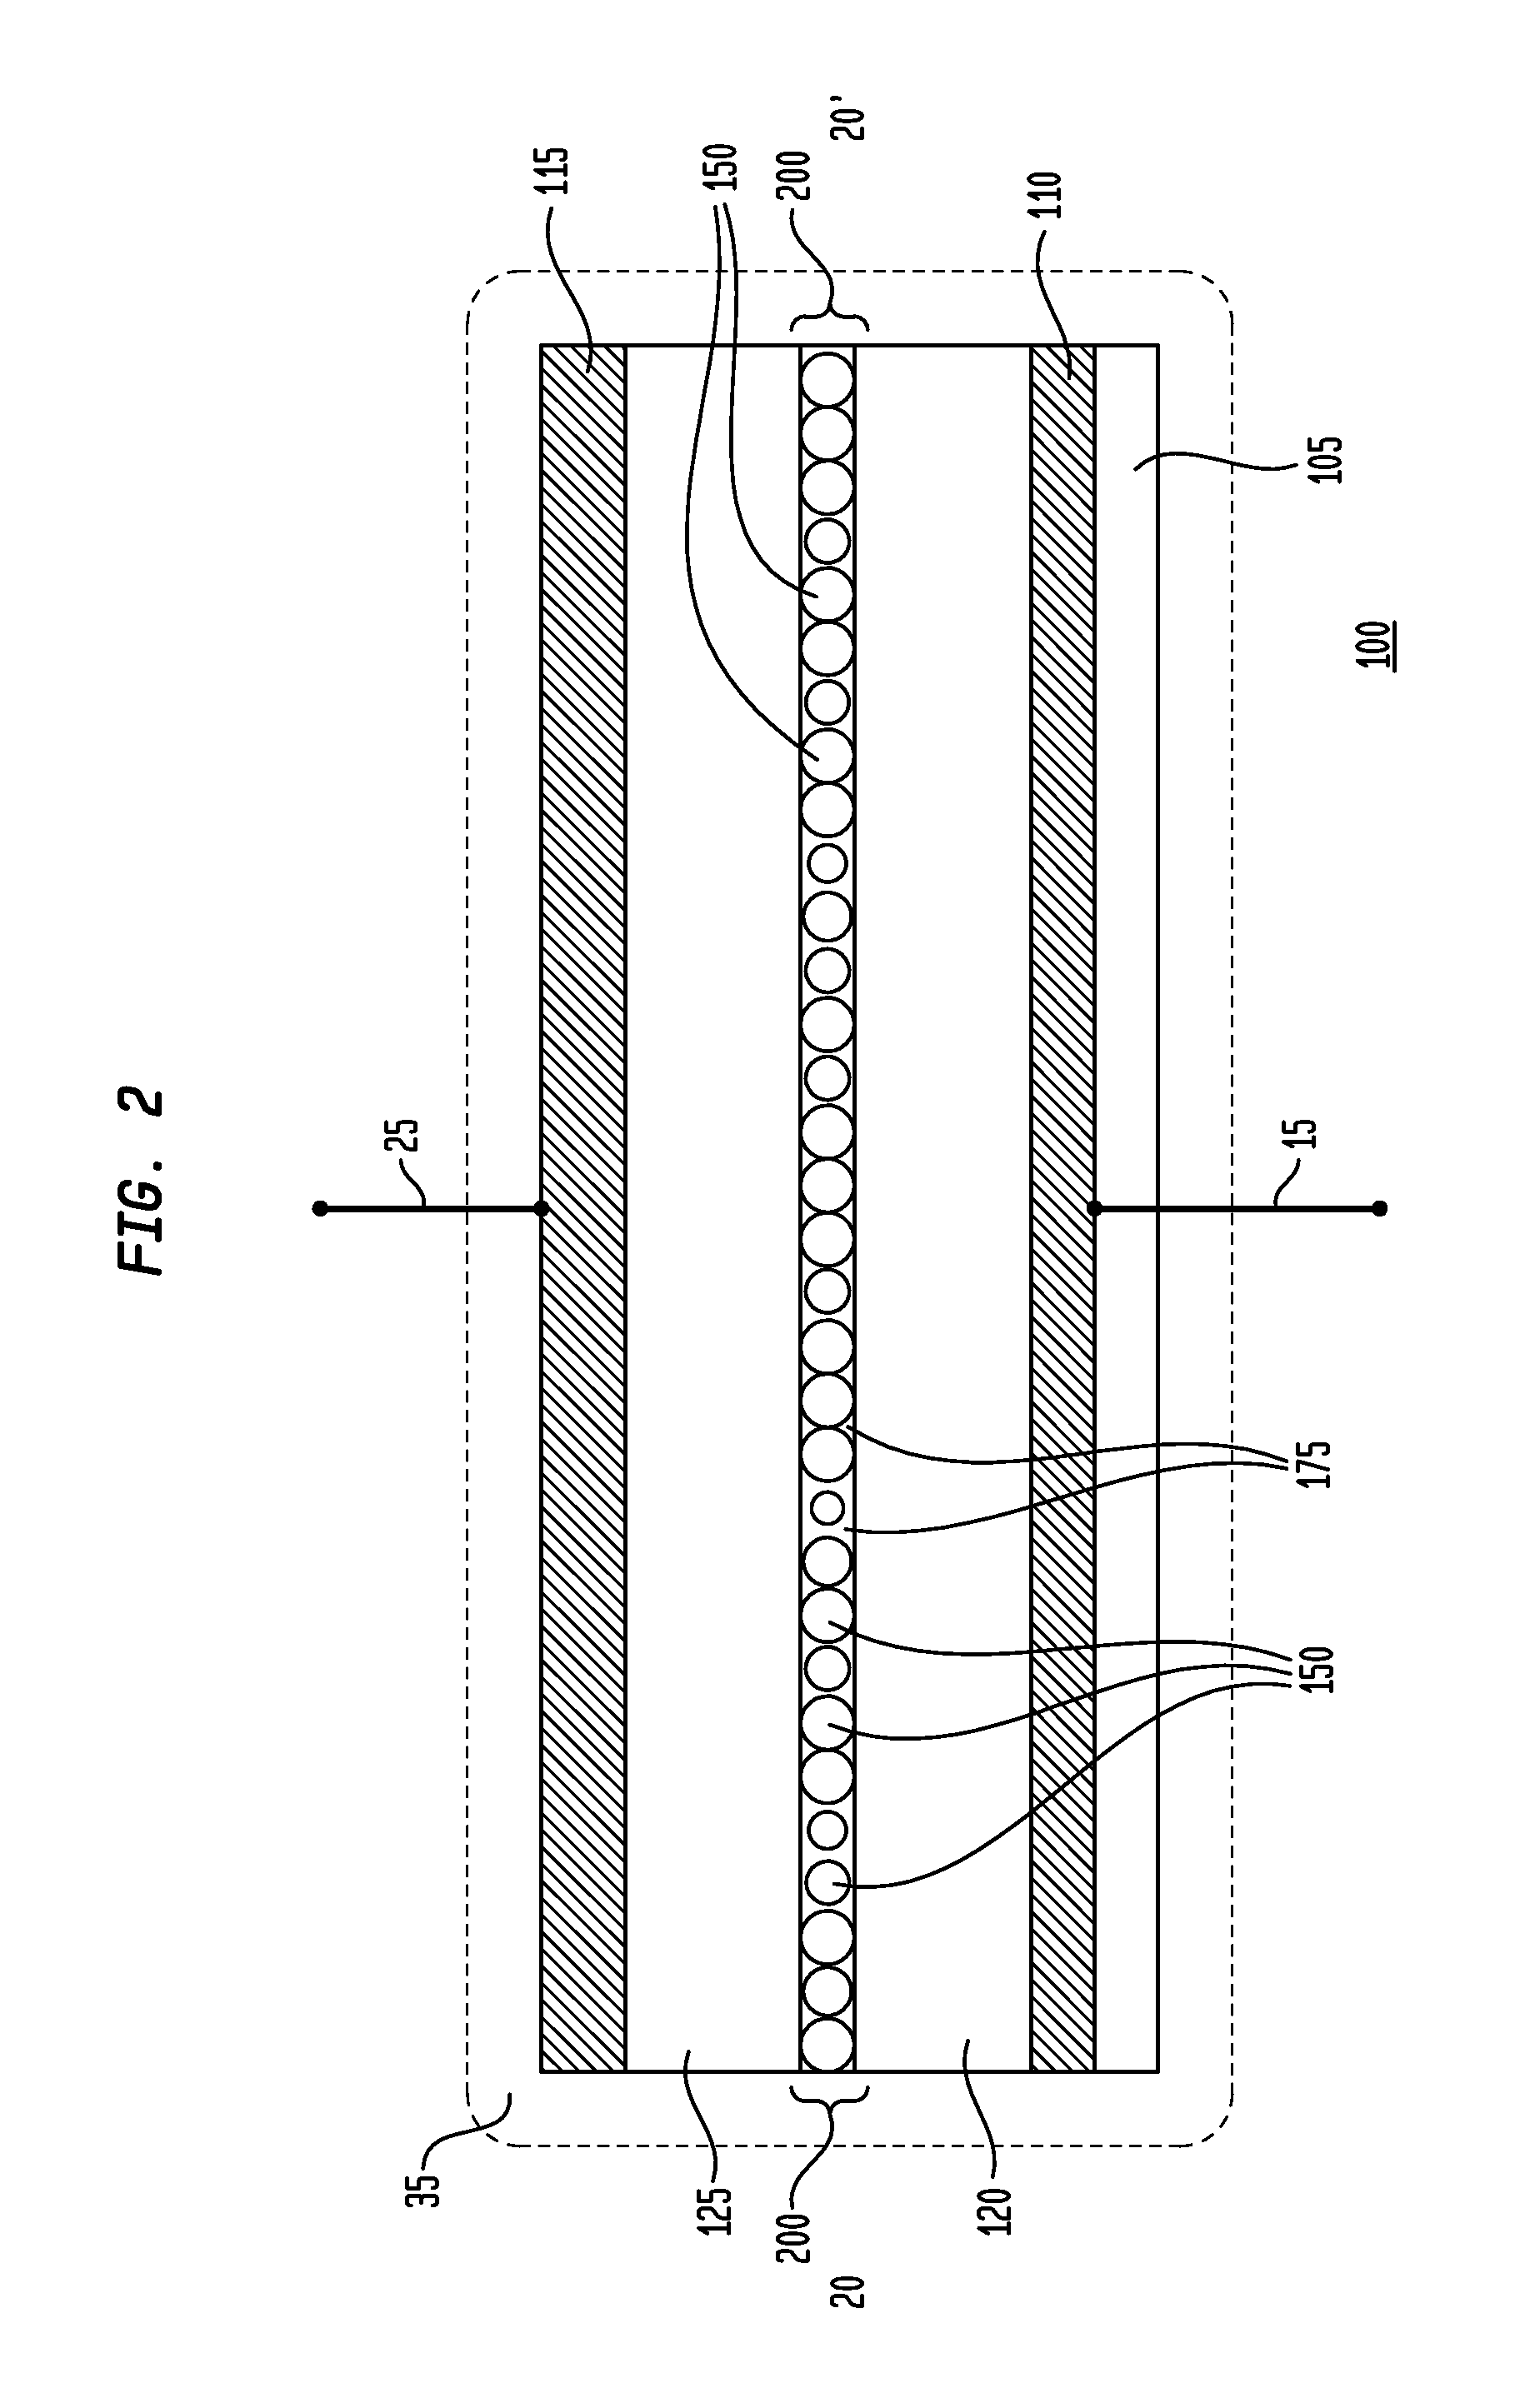 Printable Composition for an Ionic Gel Separation Layer for Energy Storage Devices